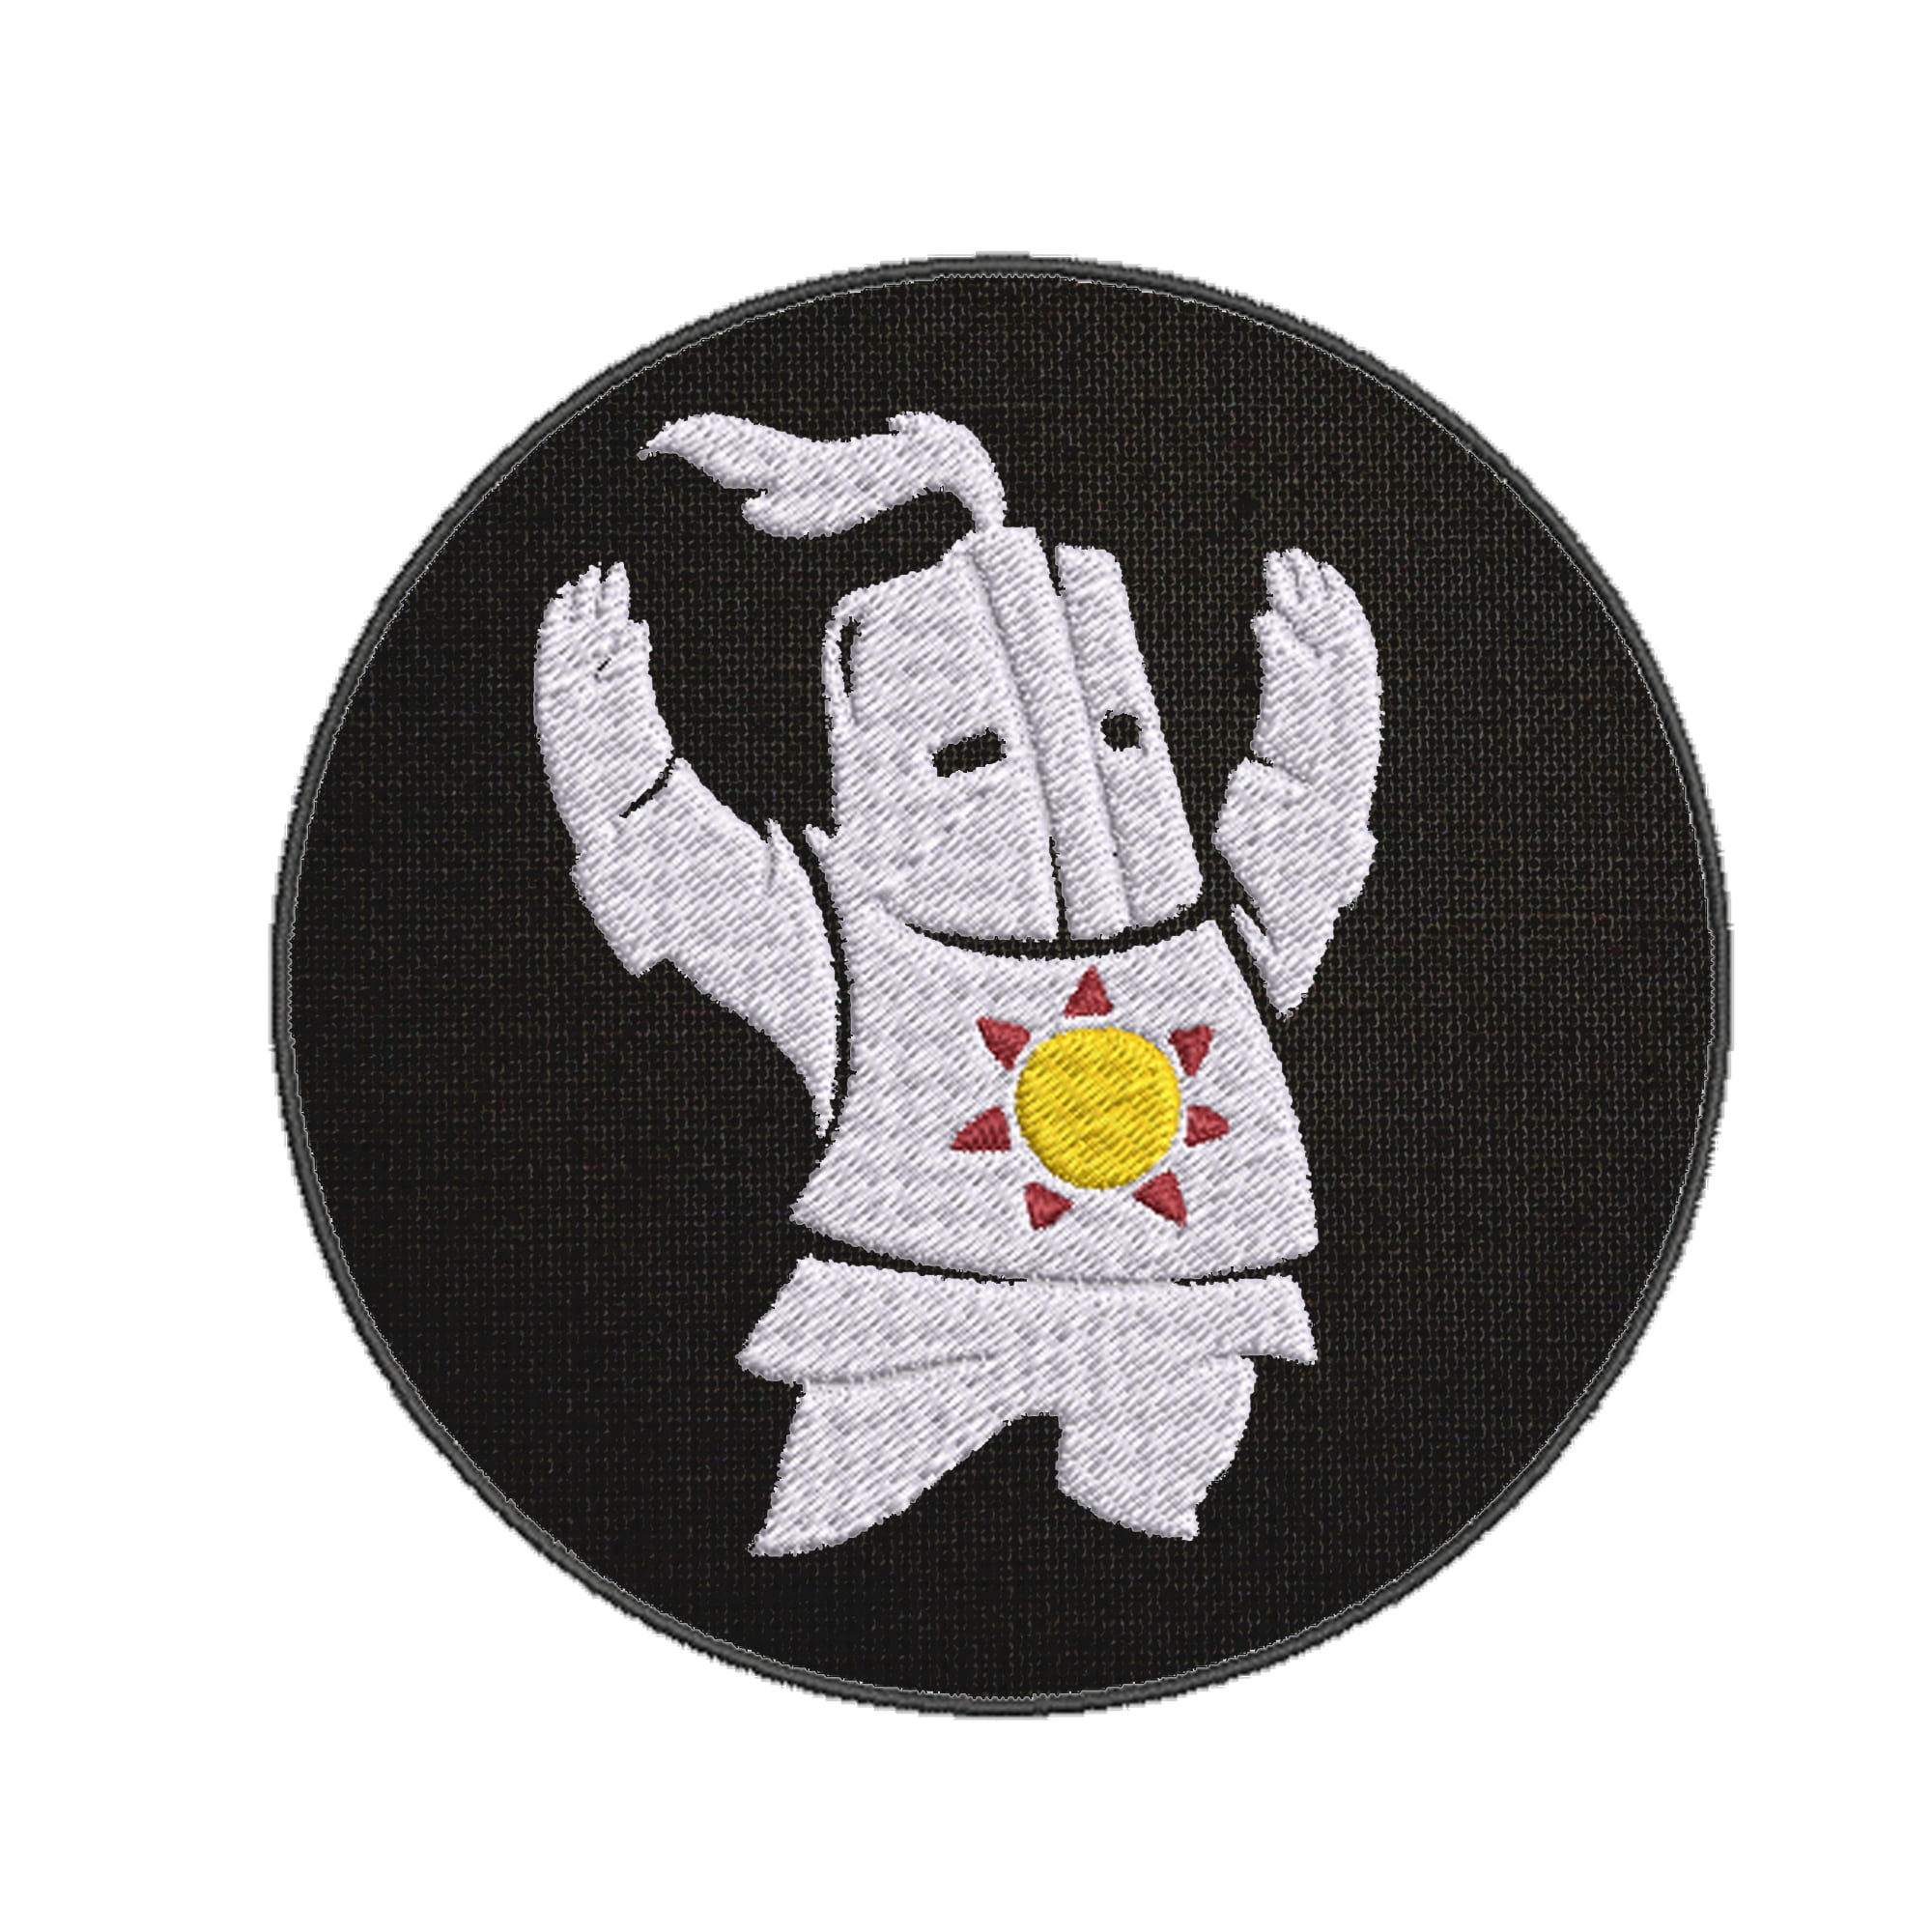  Sparta-Sports Cartoon Comic Patch Iron on or Sew on Embroidered  Applique Patch Collection 4 Pcs : Arts, Crafts & Sewing